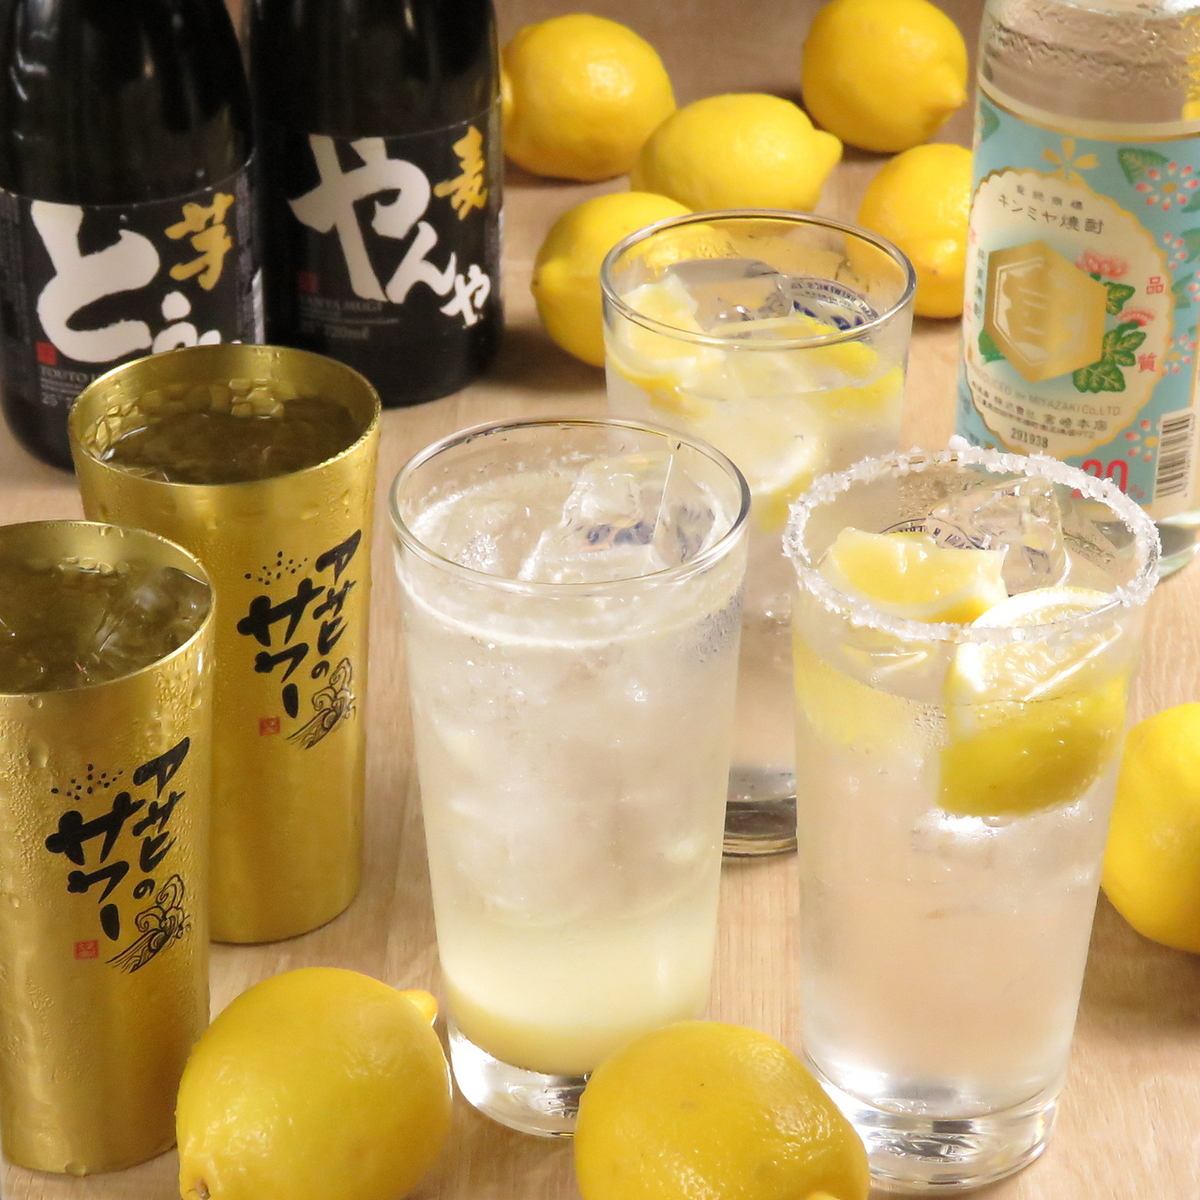 All-you-can-drink with a wide variety of drinks for 1,300 yen★9 types of lemon sour available for an additional 300 yen!